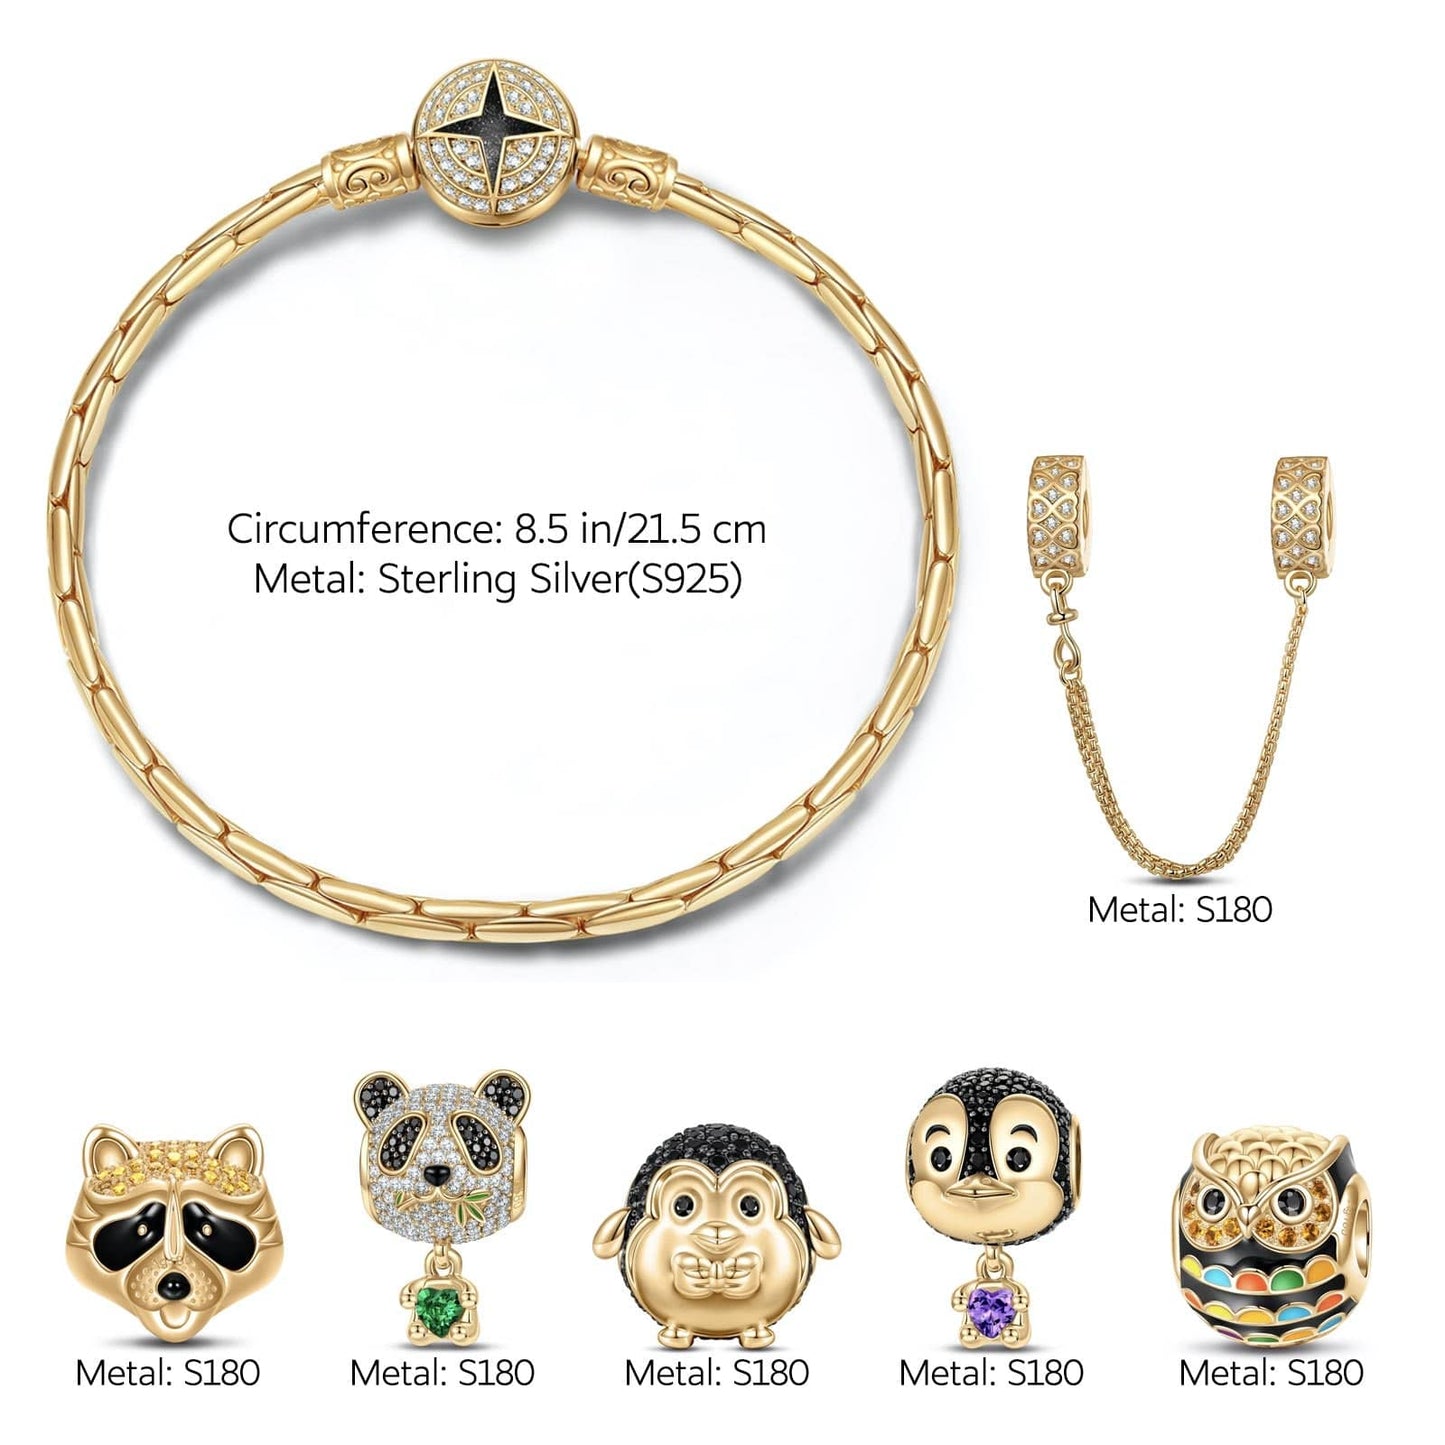 Sterling Silver Wish You Delight and Wisdom Animals Charms Bracelet Set With Enamel In 14K Gold Plated - Heartful Hugs Collection